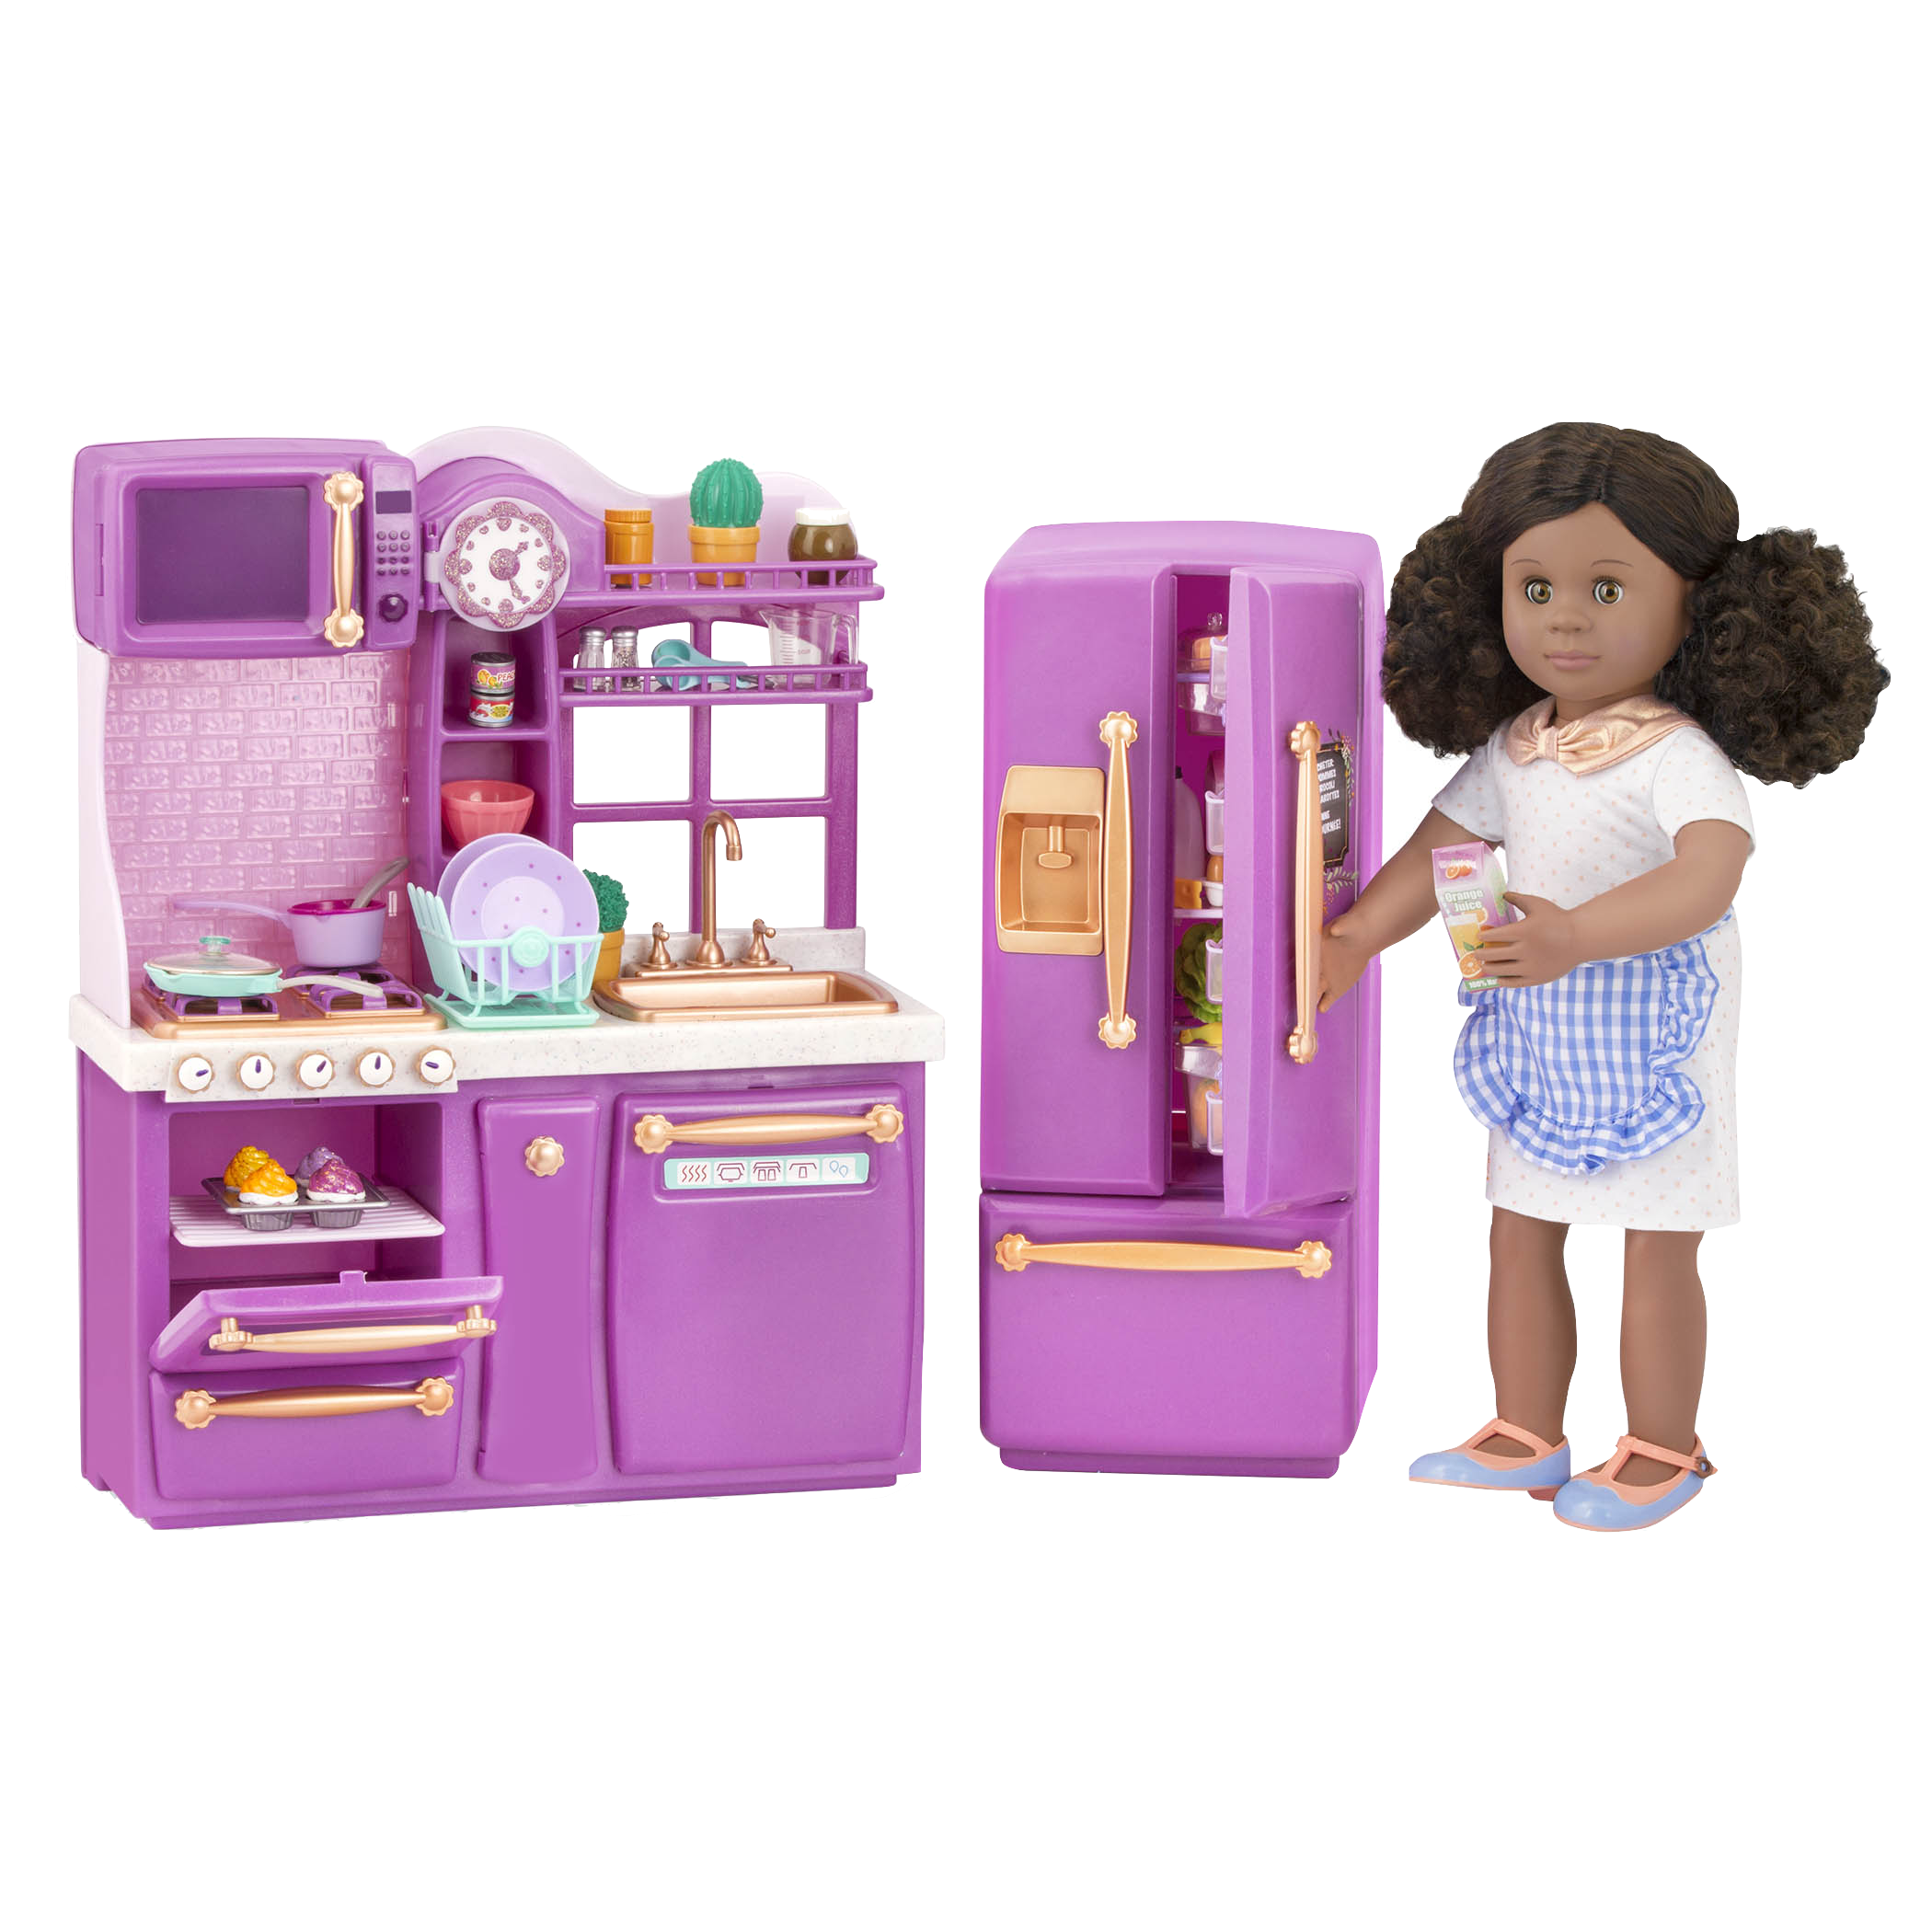  Doll Size Pink Gourmet Kitchen Cooking Toy Play Set